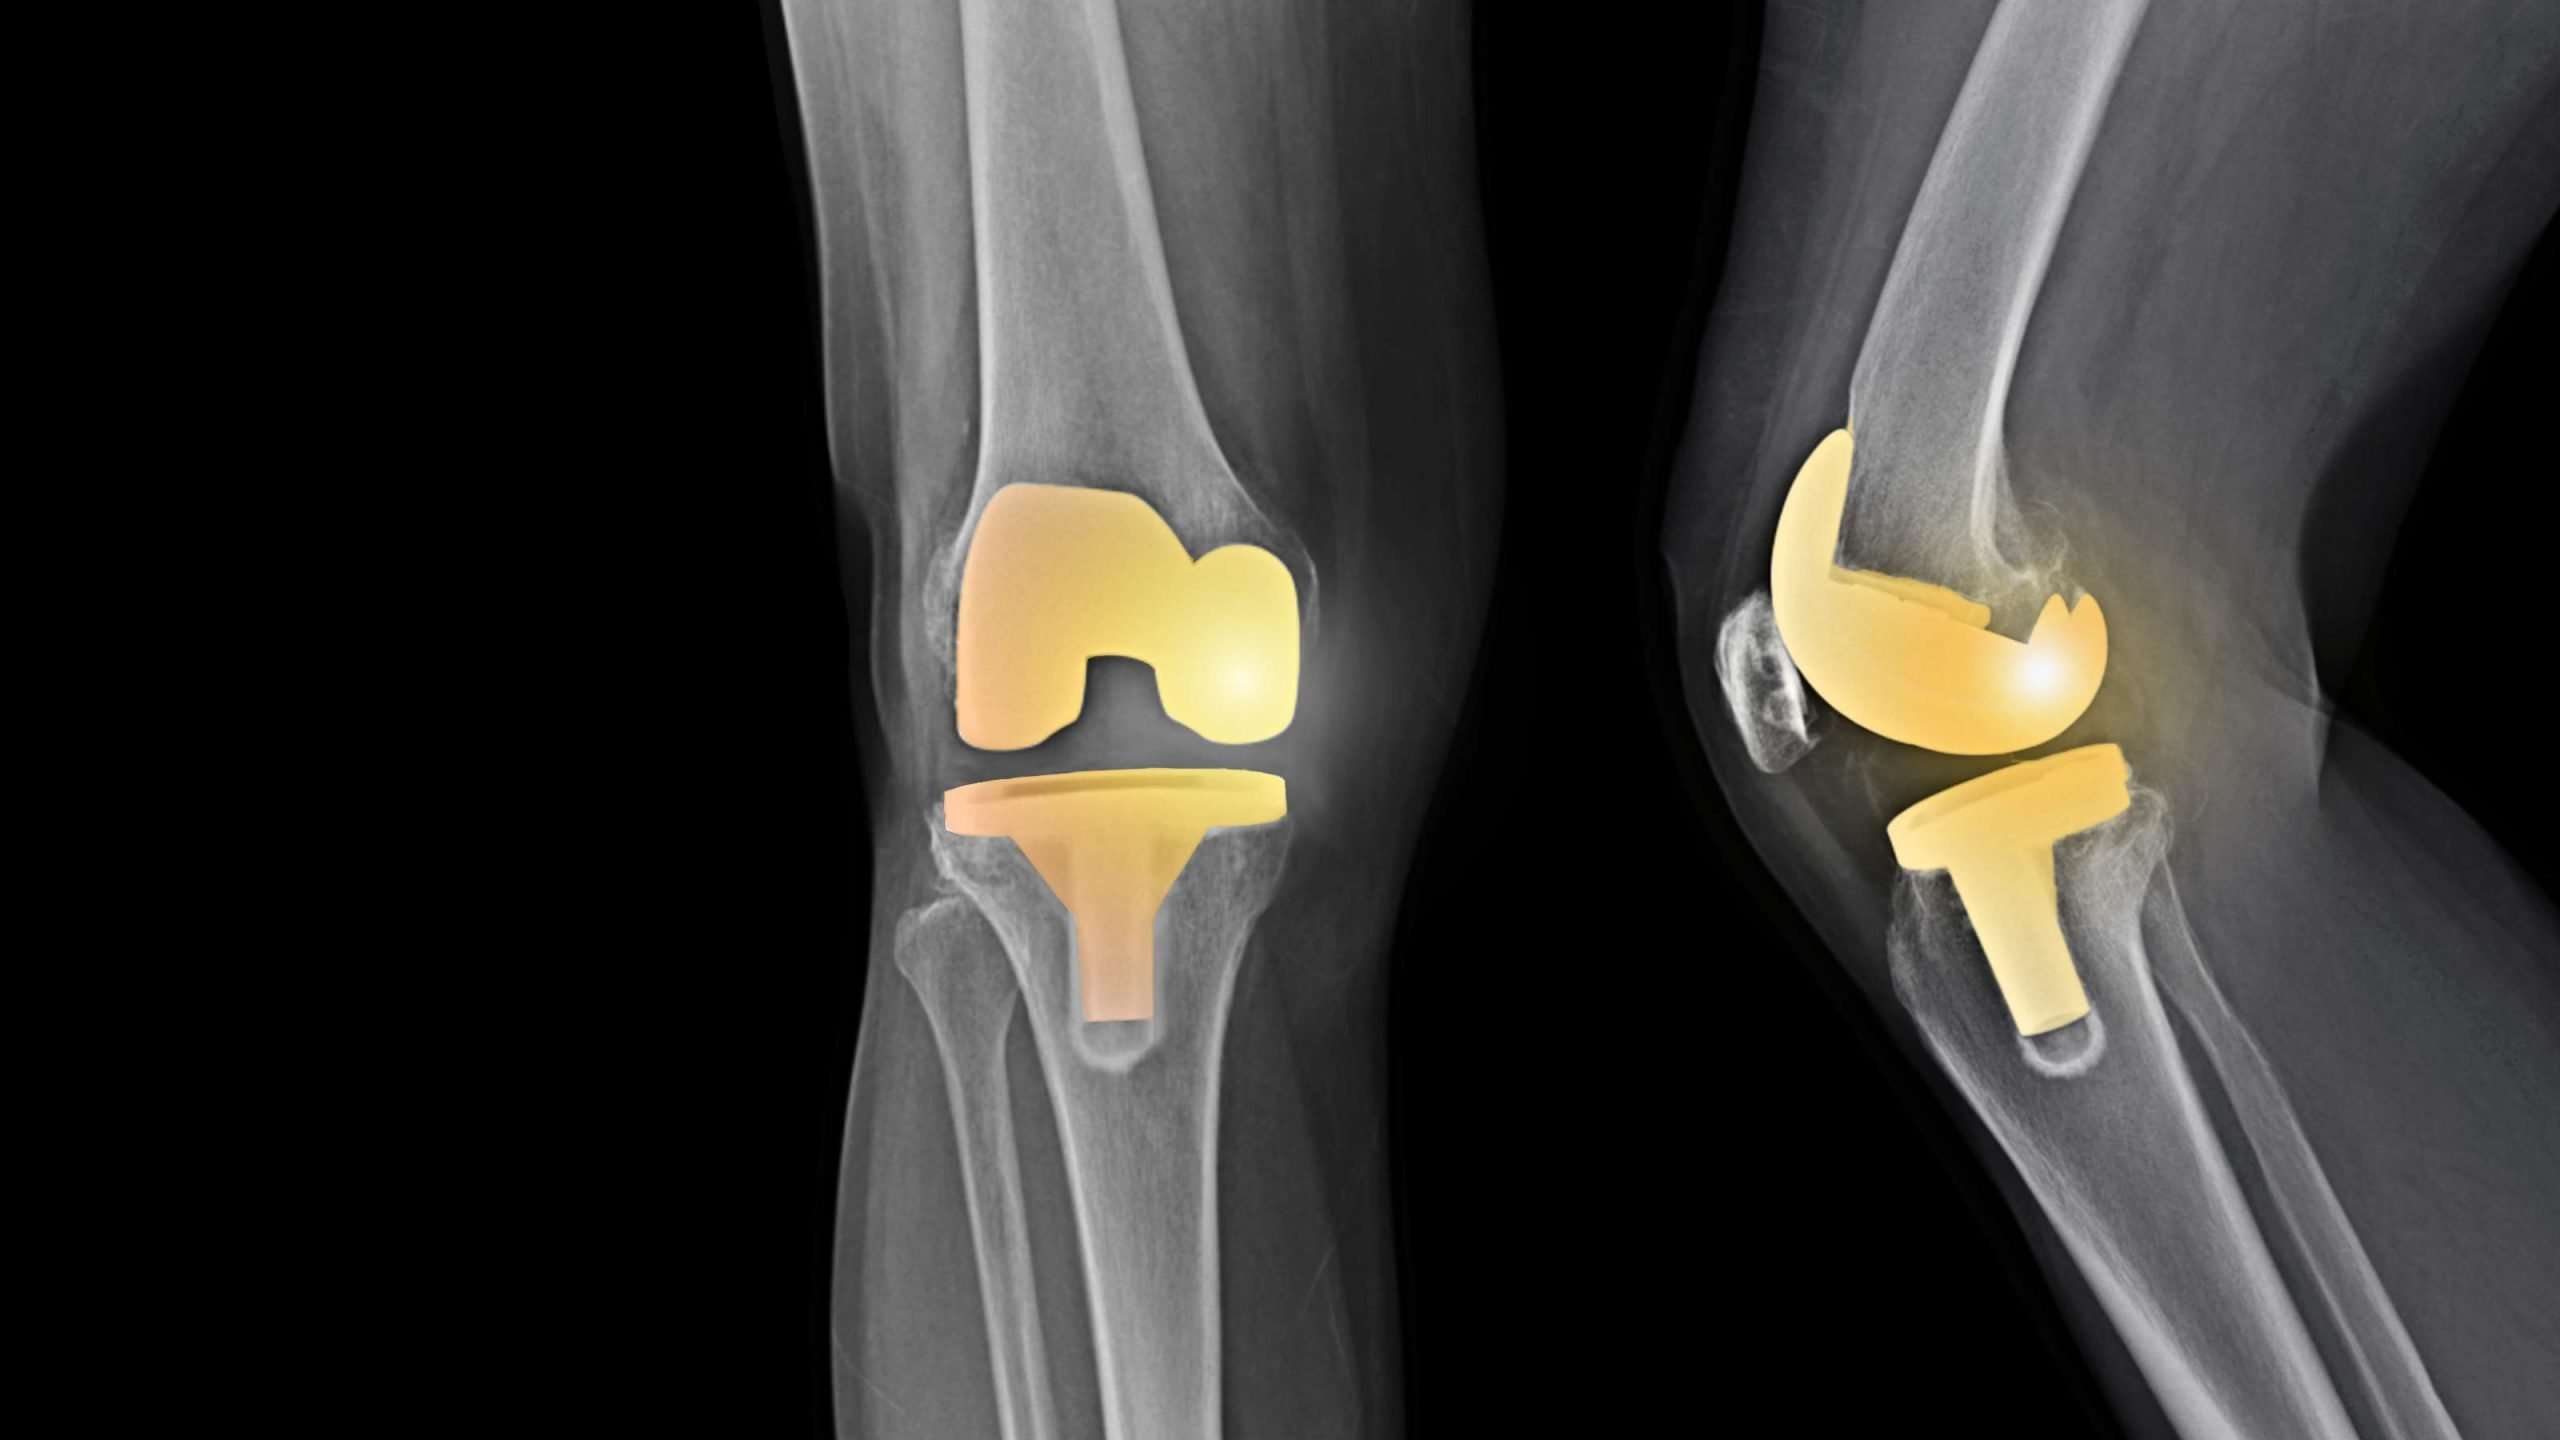 Knee Replacement Surgery: Overview